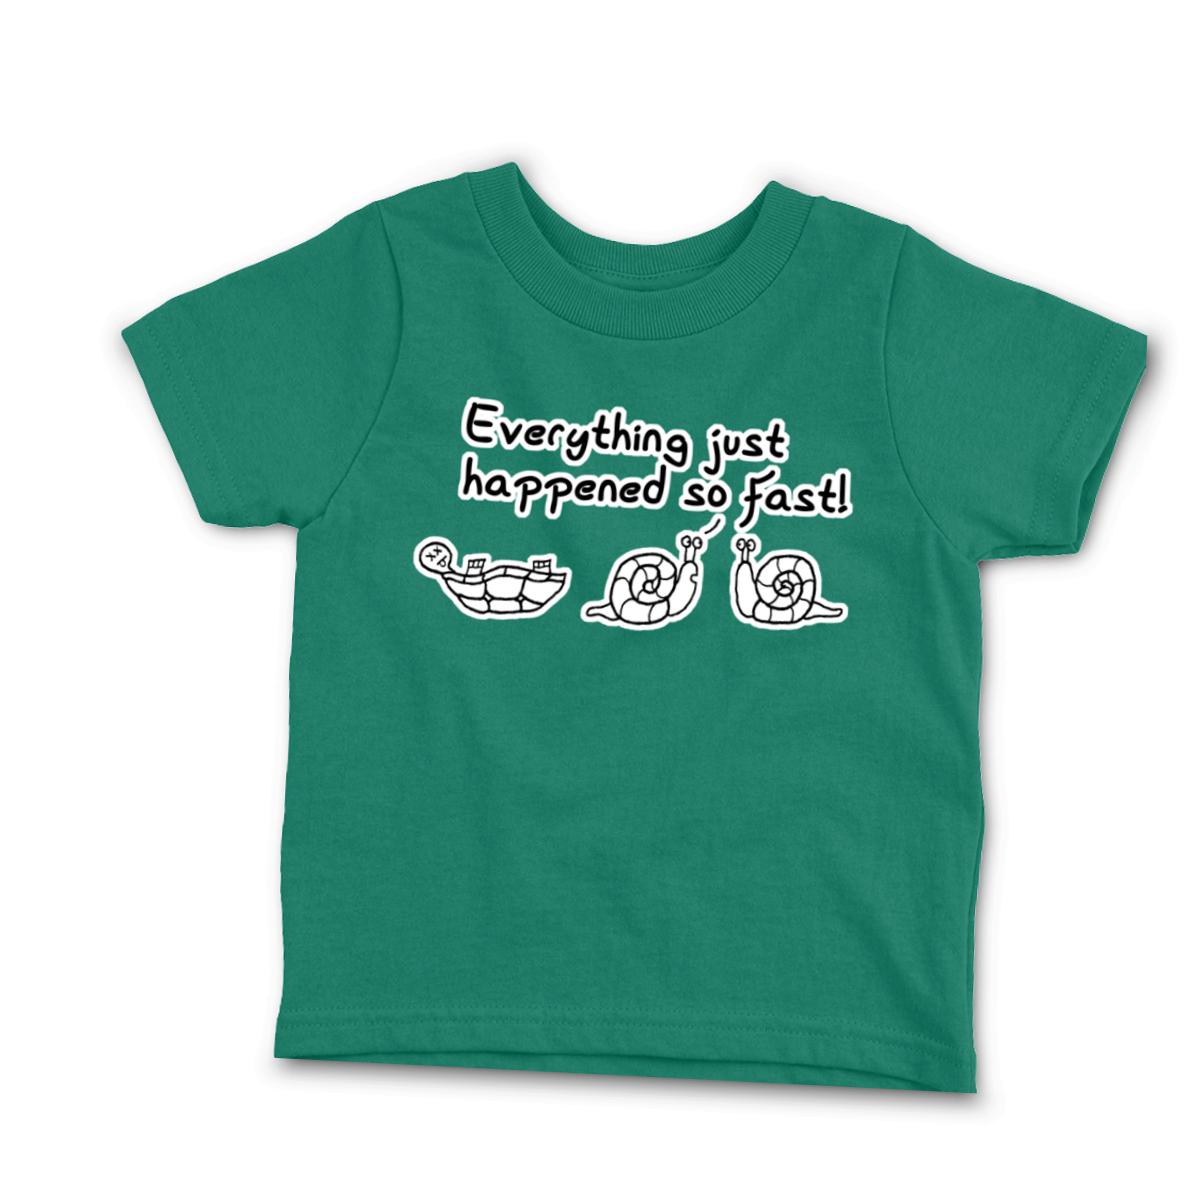 Happened So Fast Toddler Tee 2T kelly